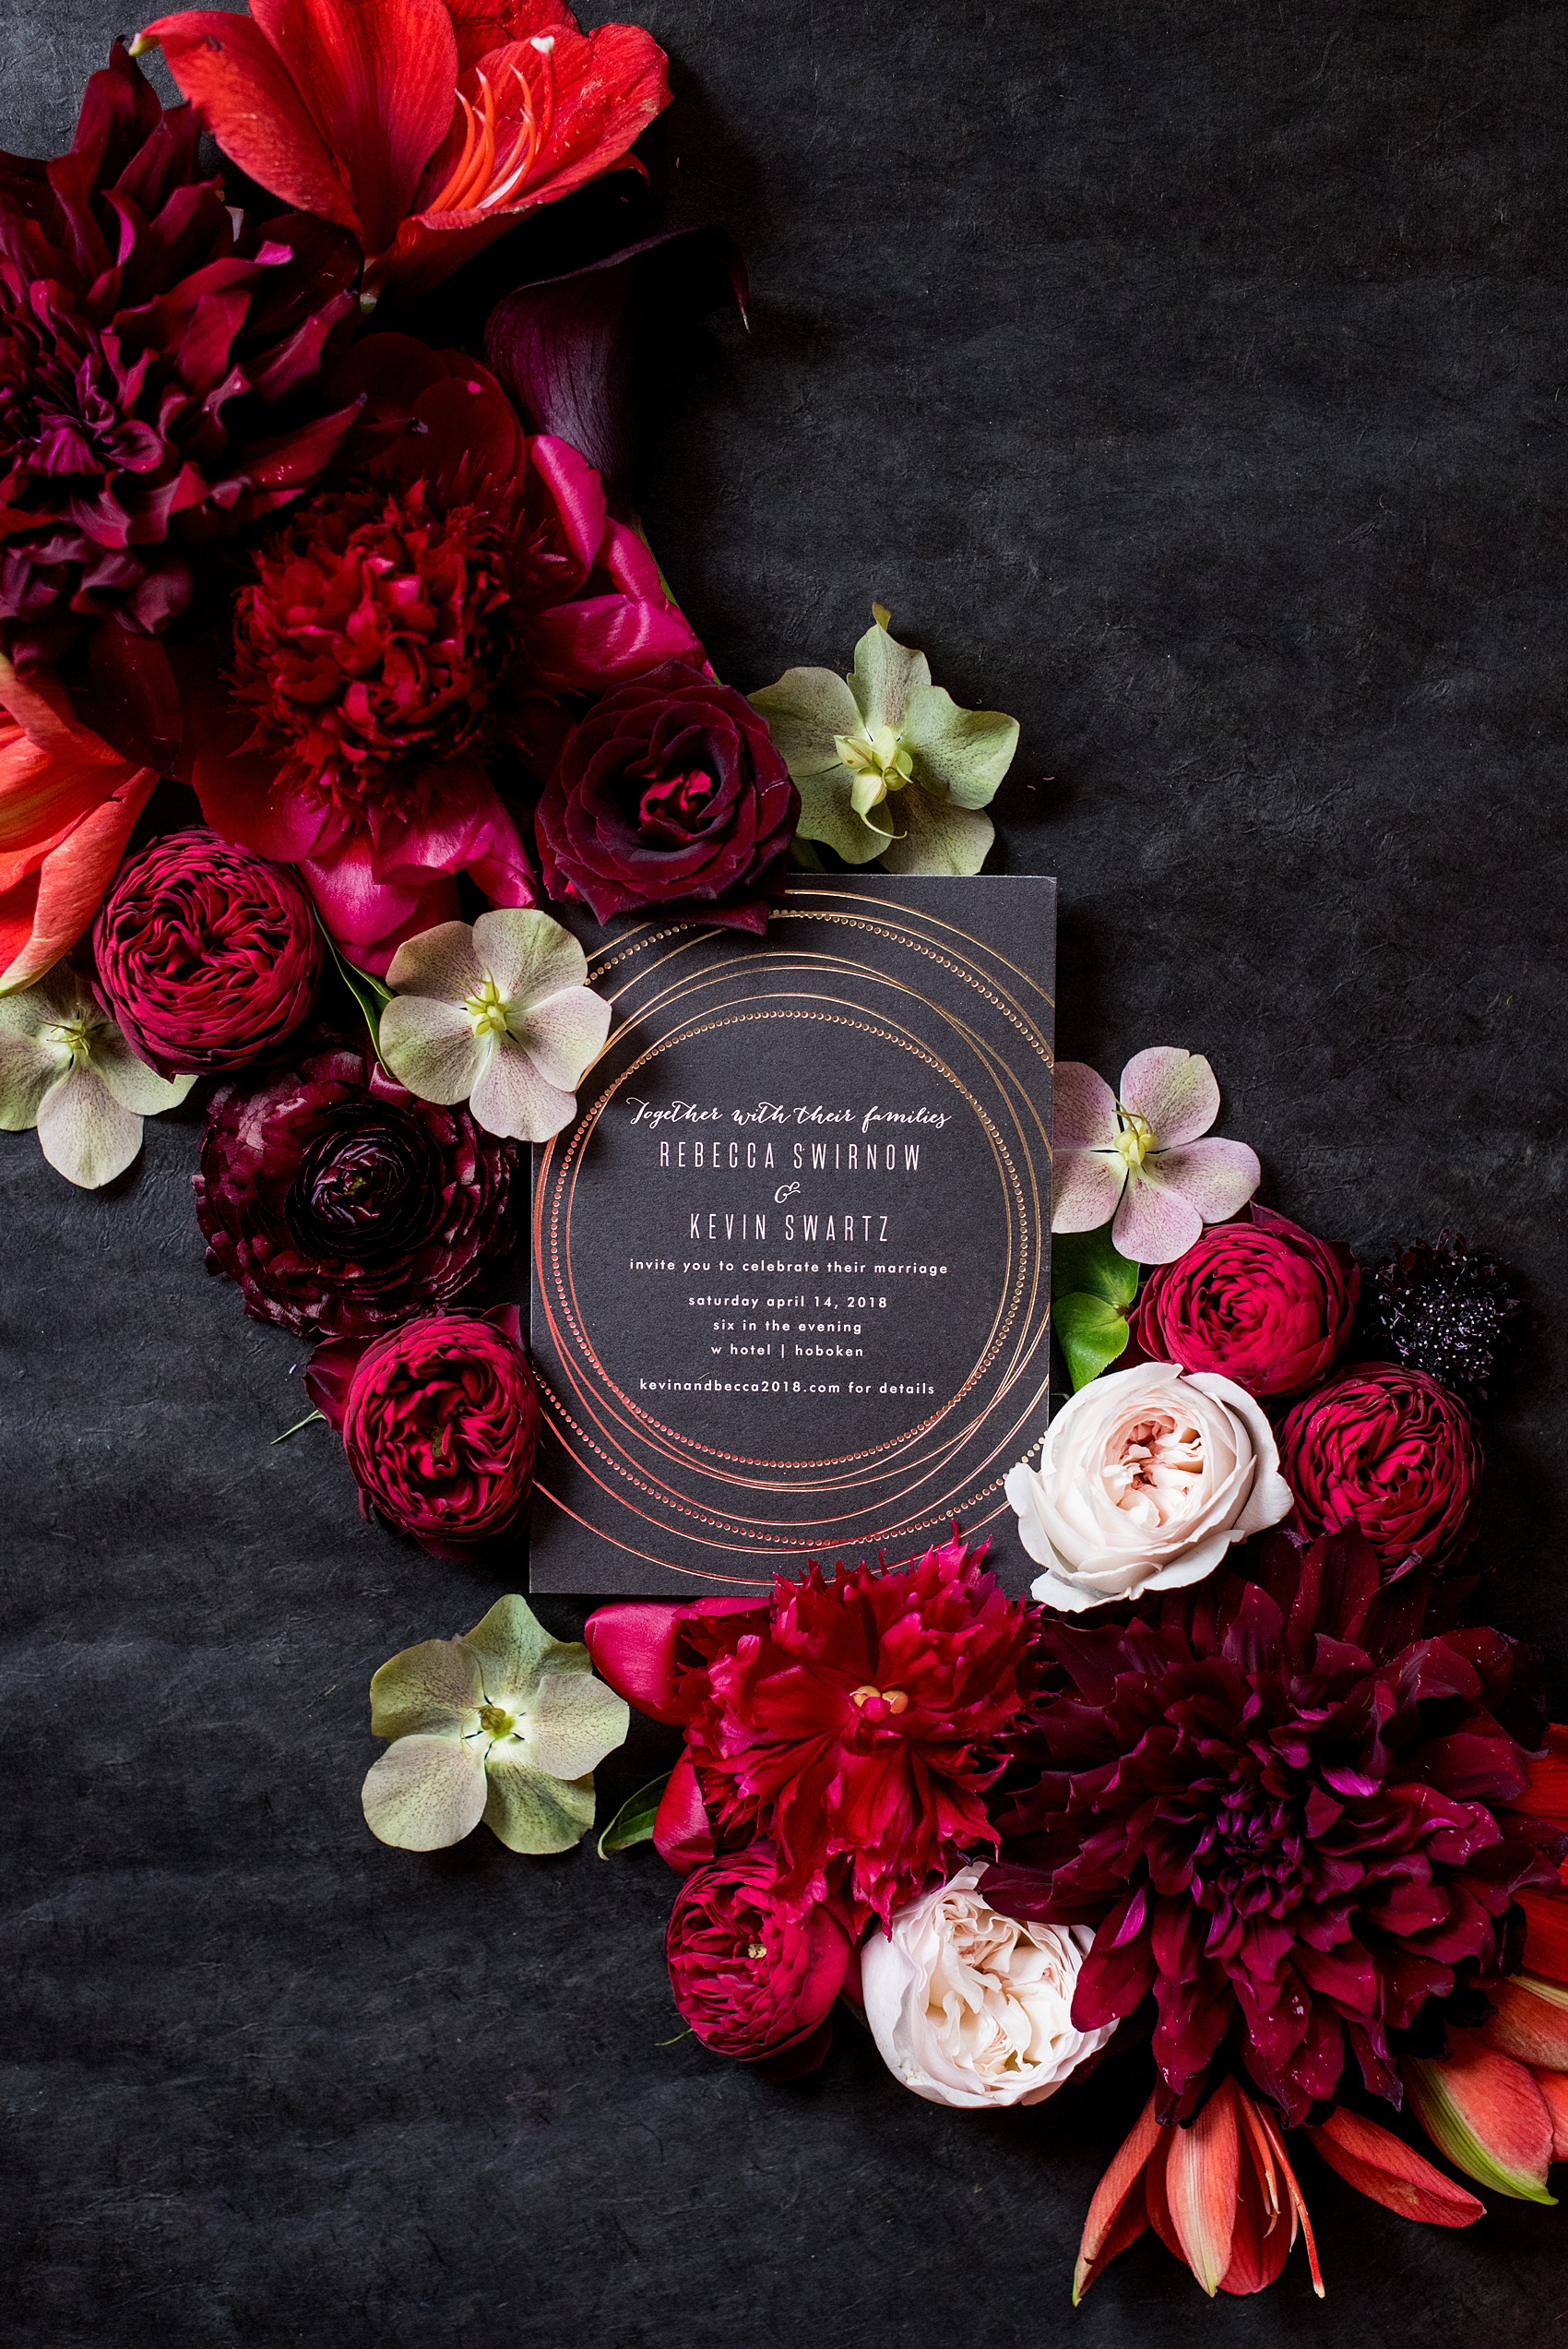 W Hoboken Wedding Photos by Mikkel Paige Photography. Spring wedding overlooking the NYC skyline, with a sexy black, deep red, burgundy and fuchsia color palette. Photo fo the bride and groom's black and gold invitation with red flowers. #HobokenWedding #mikkelpaige #springwedding #romanticwedding #NewJerseyWeddingPhotos